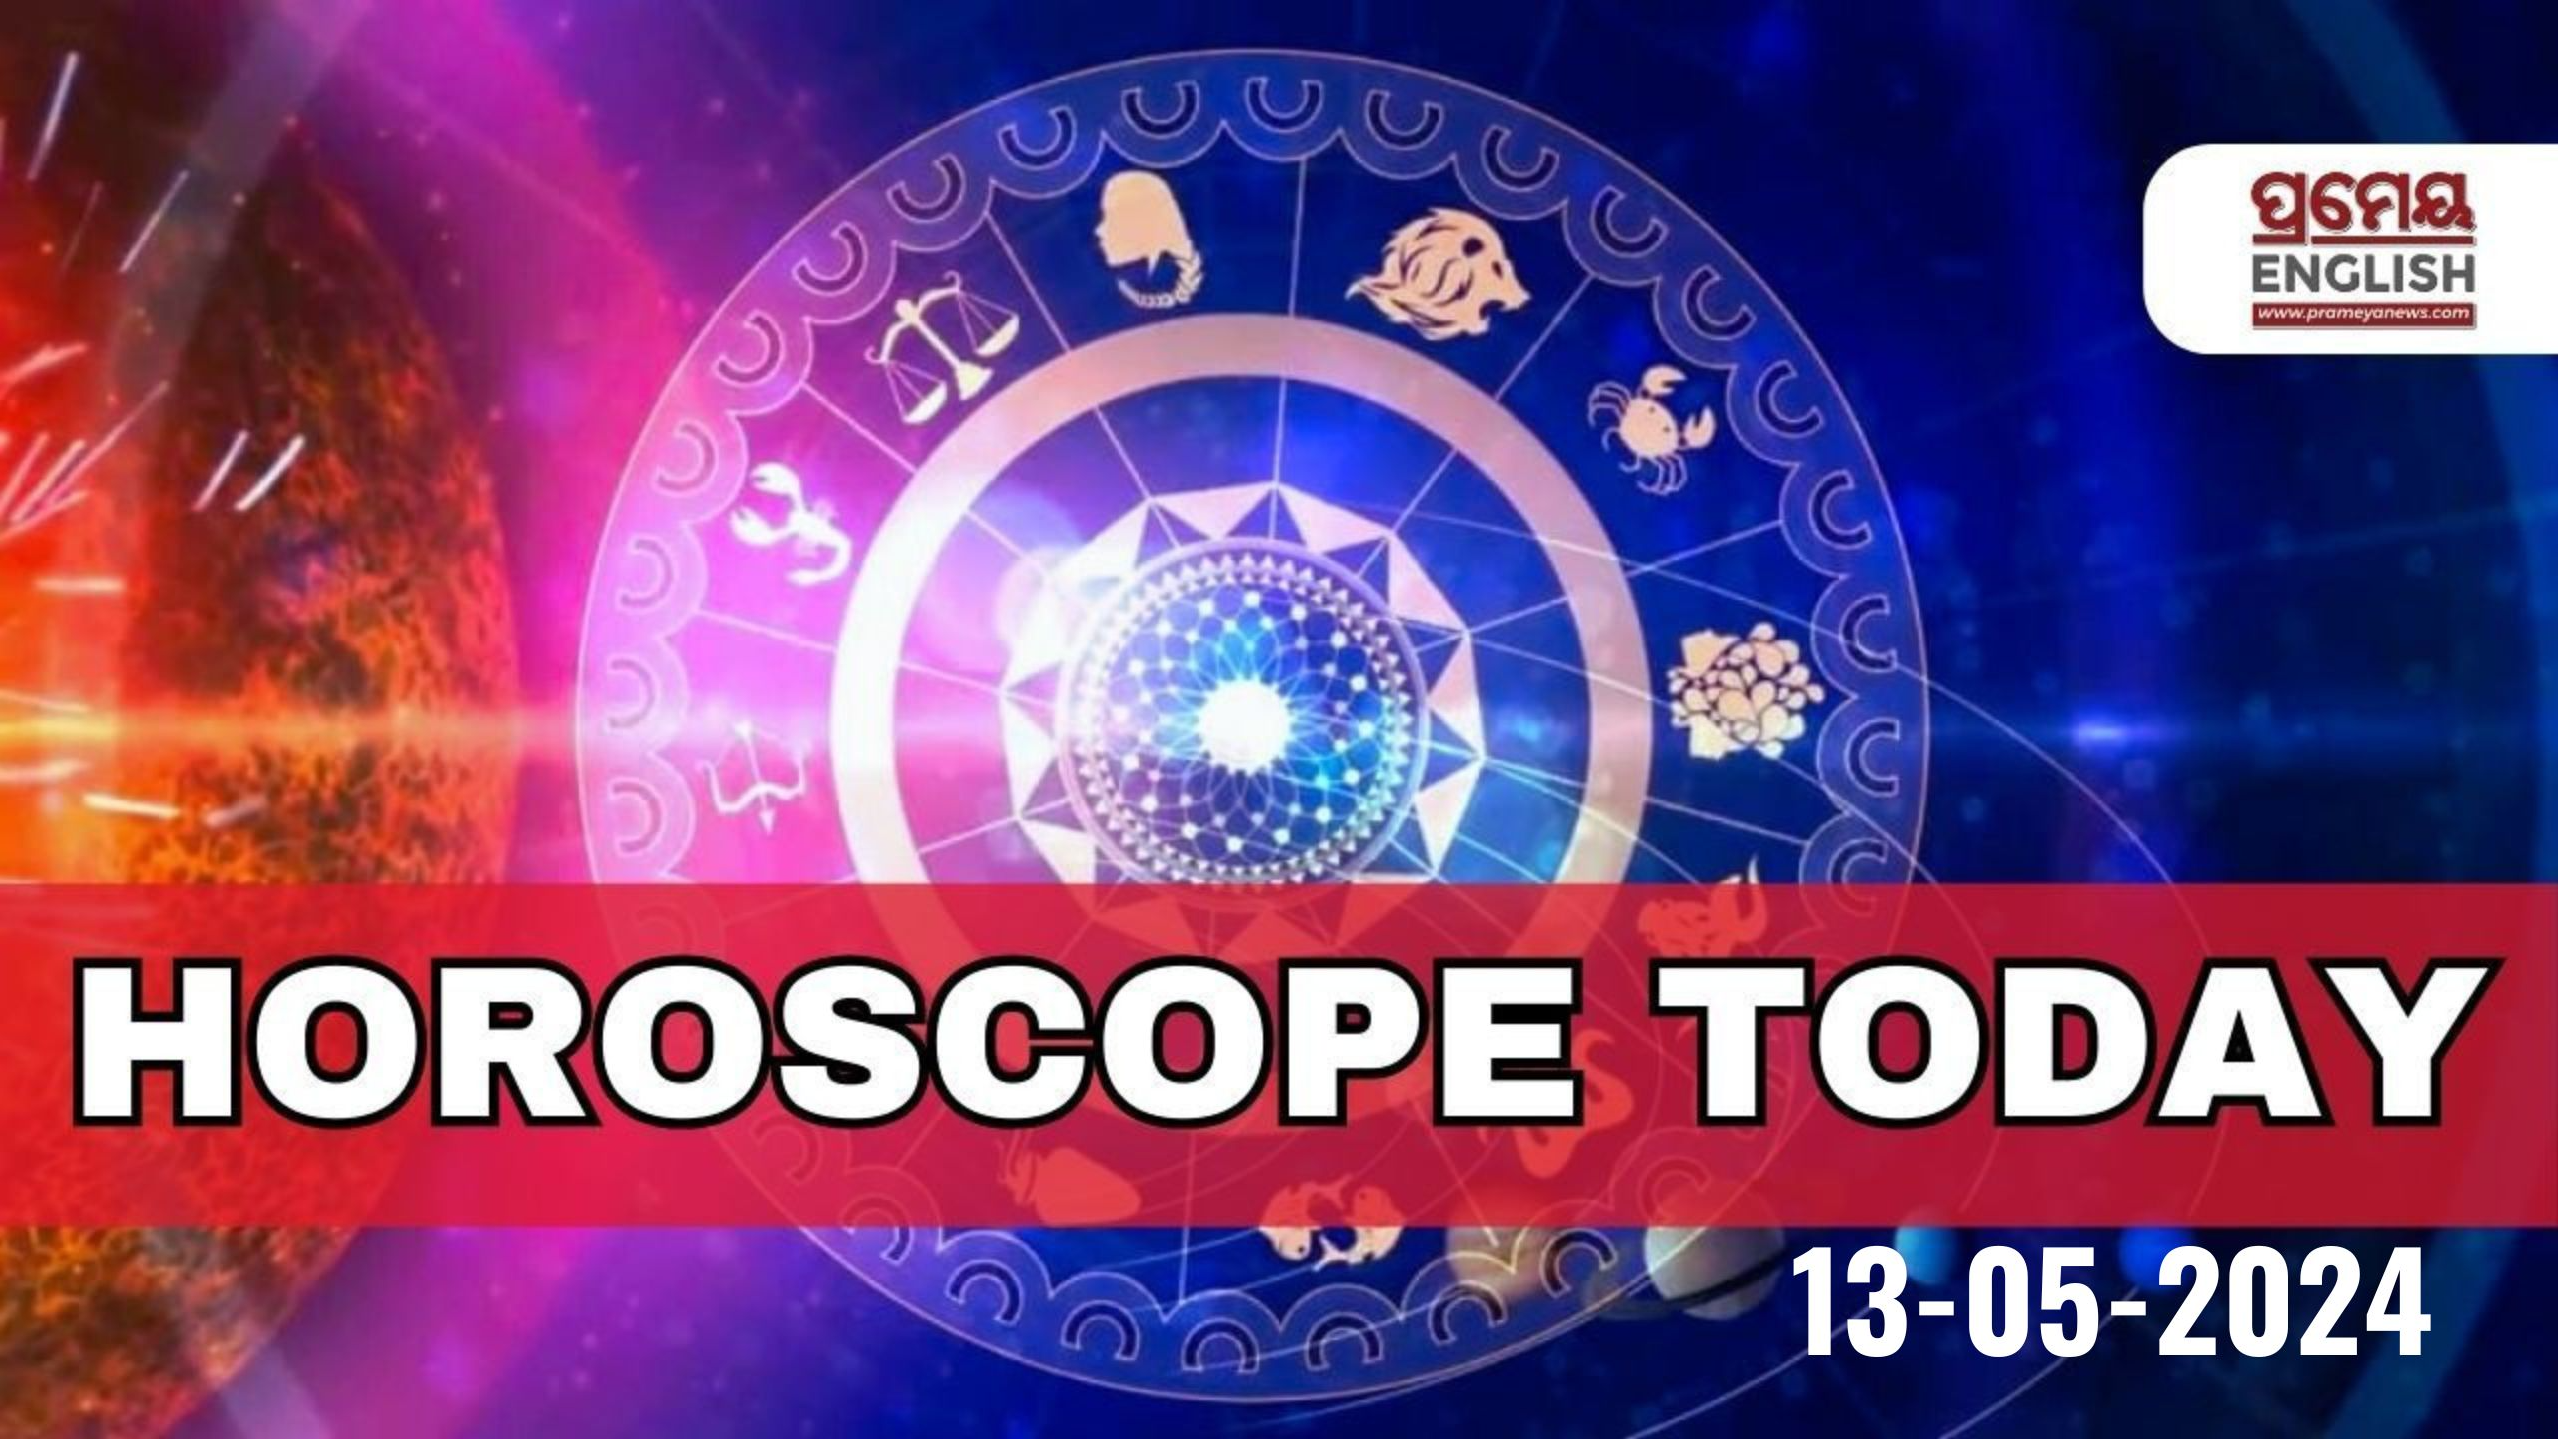  Horoscope Today: Astrological prediction for May 9, 2024